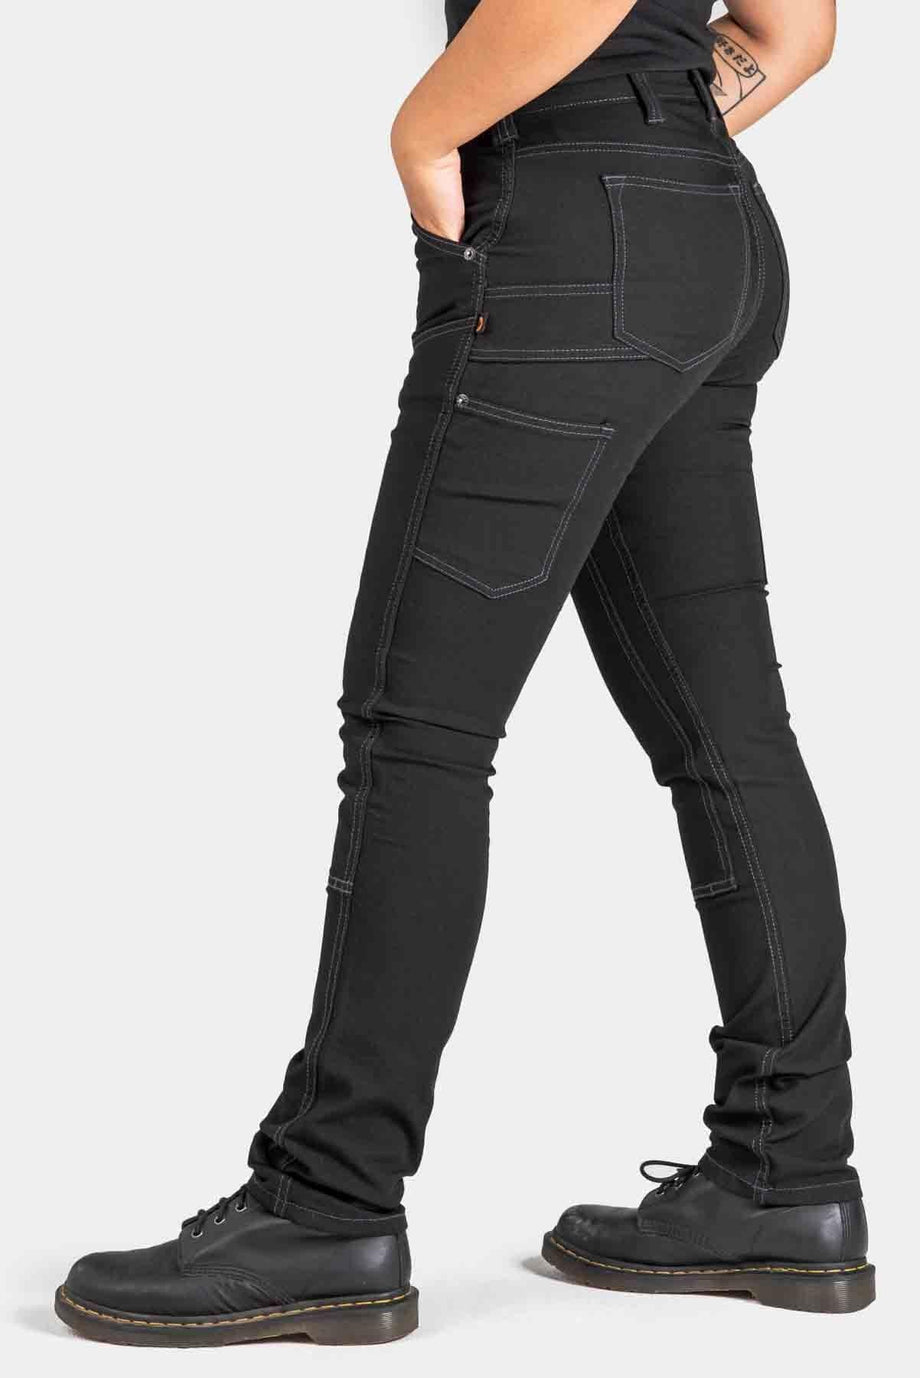 DX Bootcut in CORDURA® Canvas, Heavy Duty Mid-rise Work Pant for Women